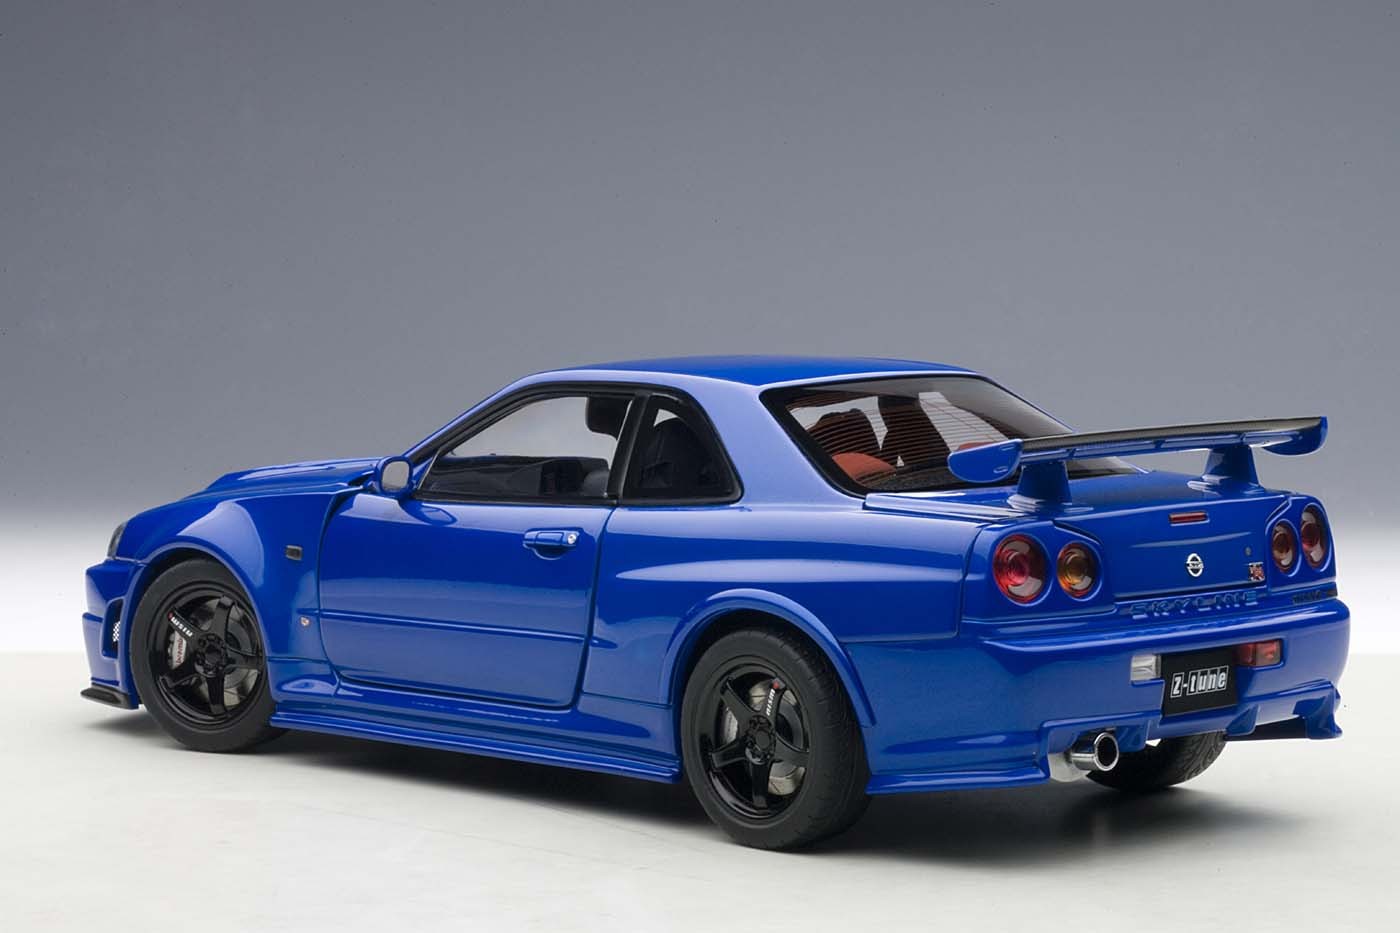 Autoart Die Cast Model Nissan R34 Gt R Z Tune Skyline Bayside Blue Die Cast Model In 1 18 Scale Item Au Eztoys Diecast Models And Collectibles